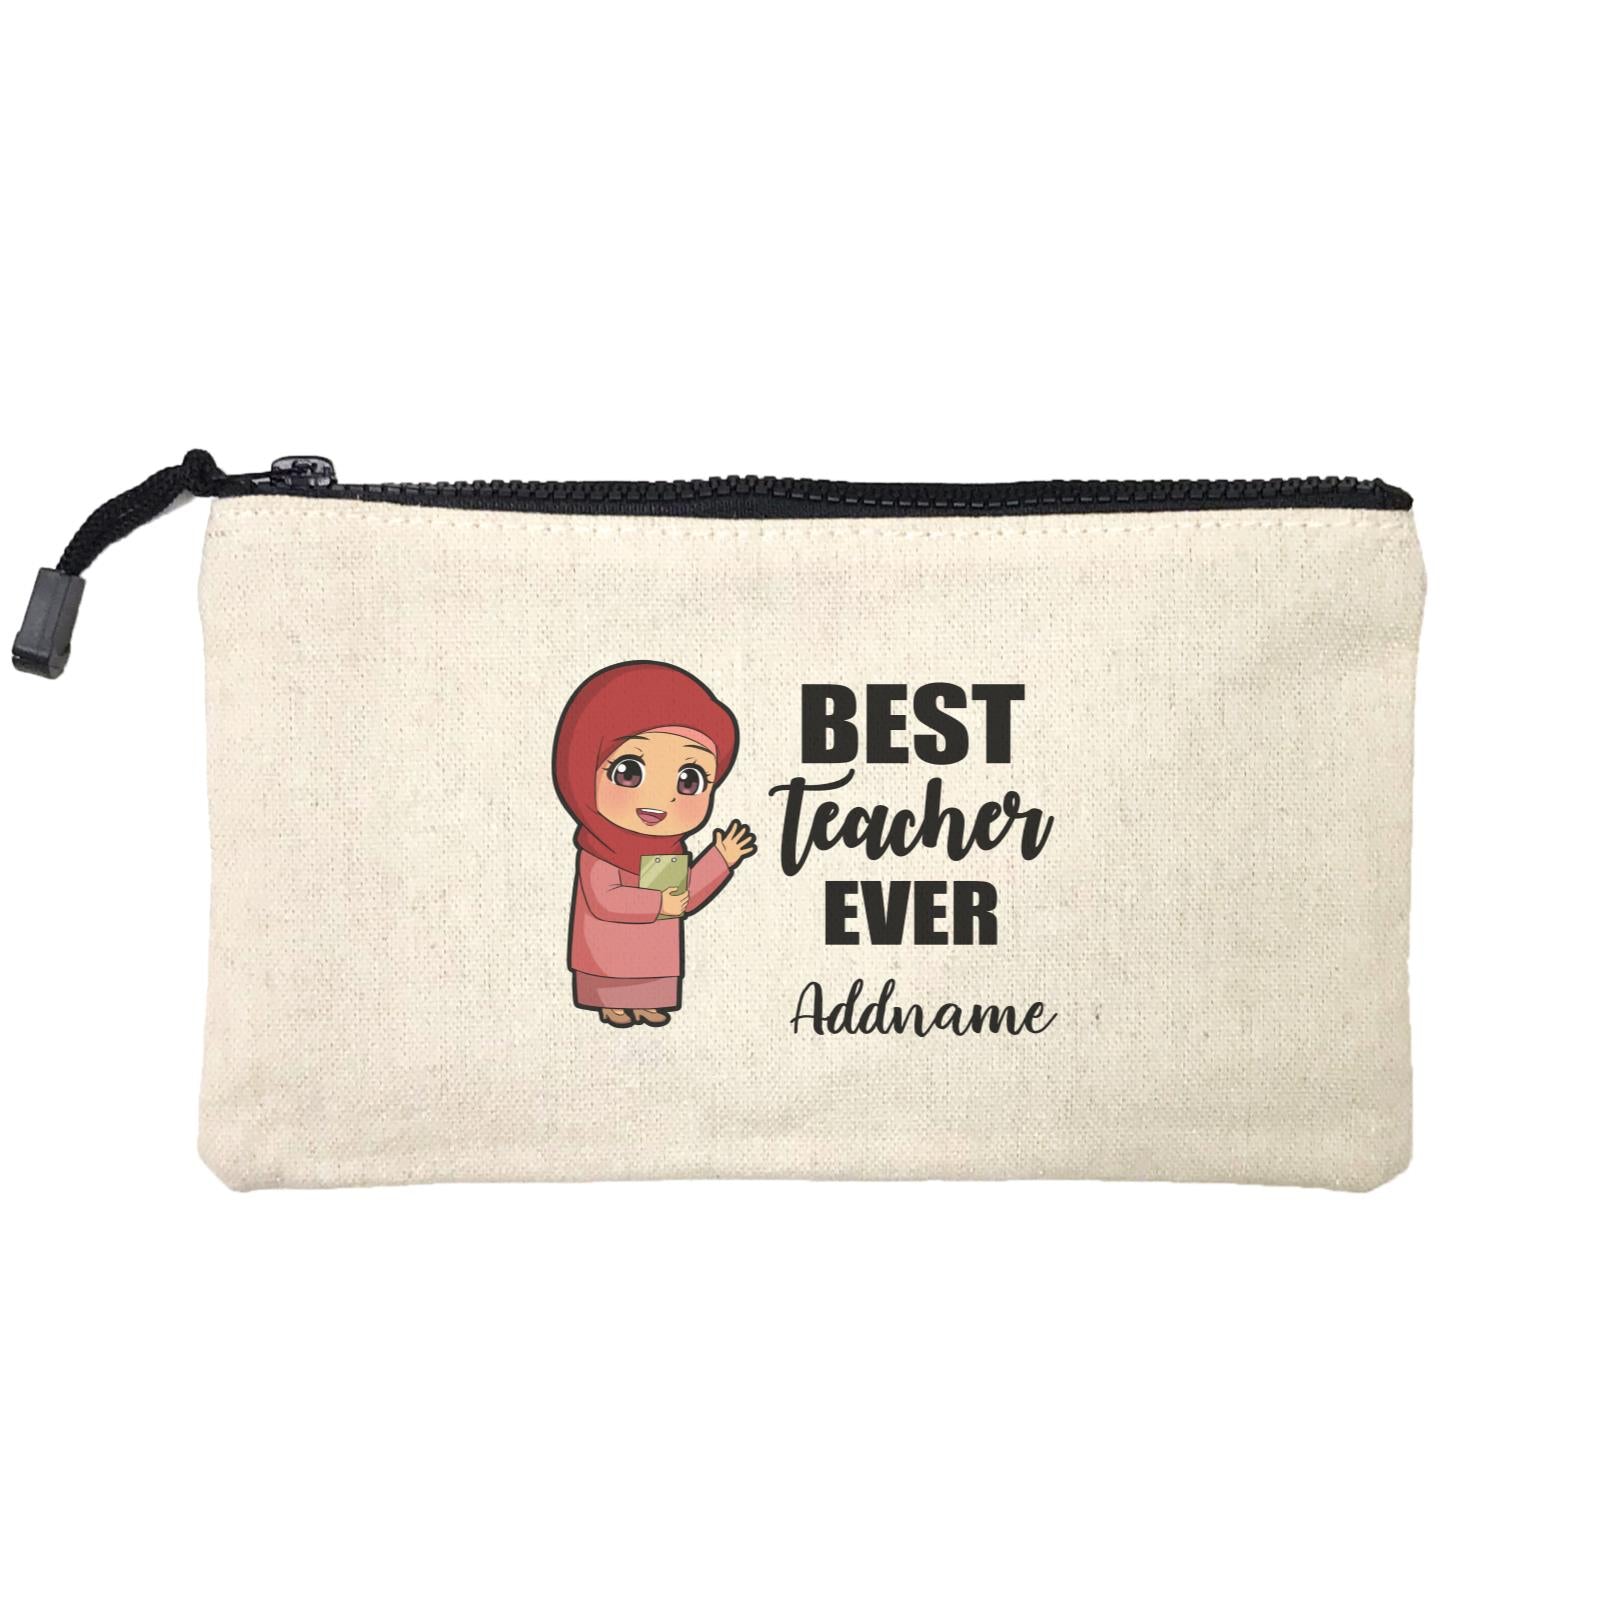 Chibi Teachers Malay Woman Best Teacher Ever Addname Mini Accessories Stationery Pouch